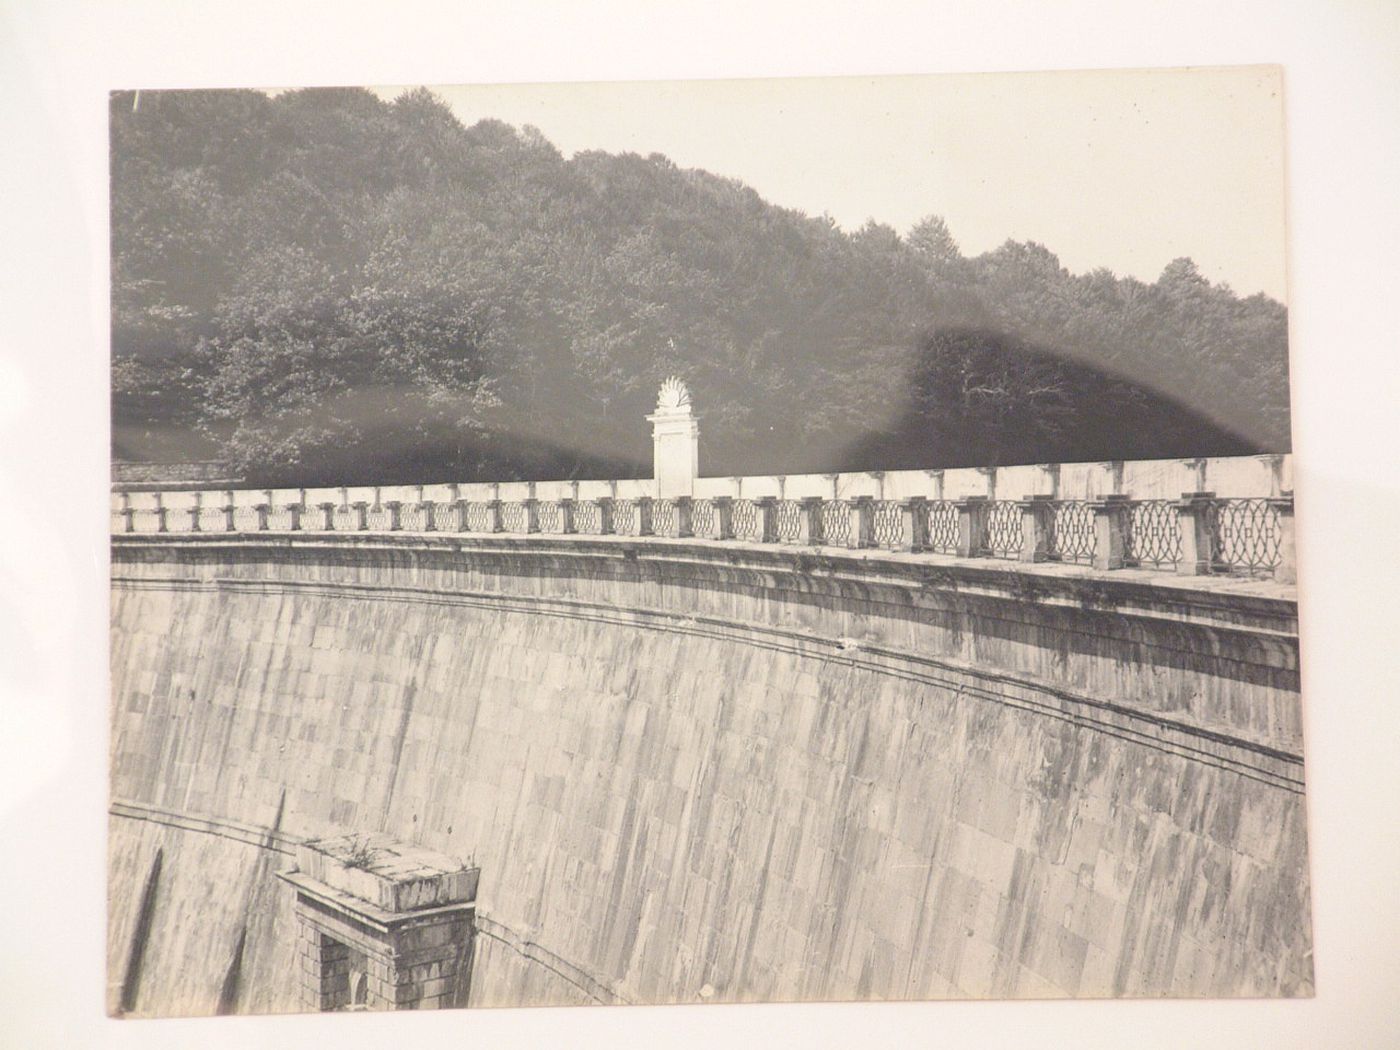 View of a dam with trees in the background, Belgrade, Yugoslavia